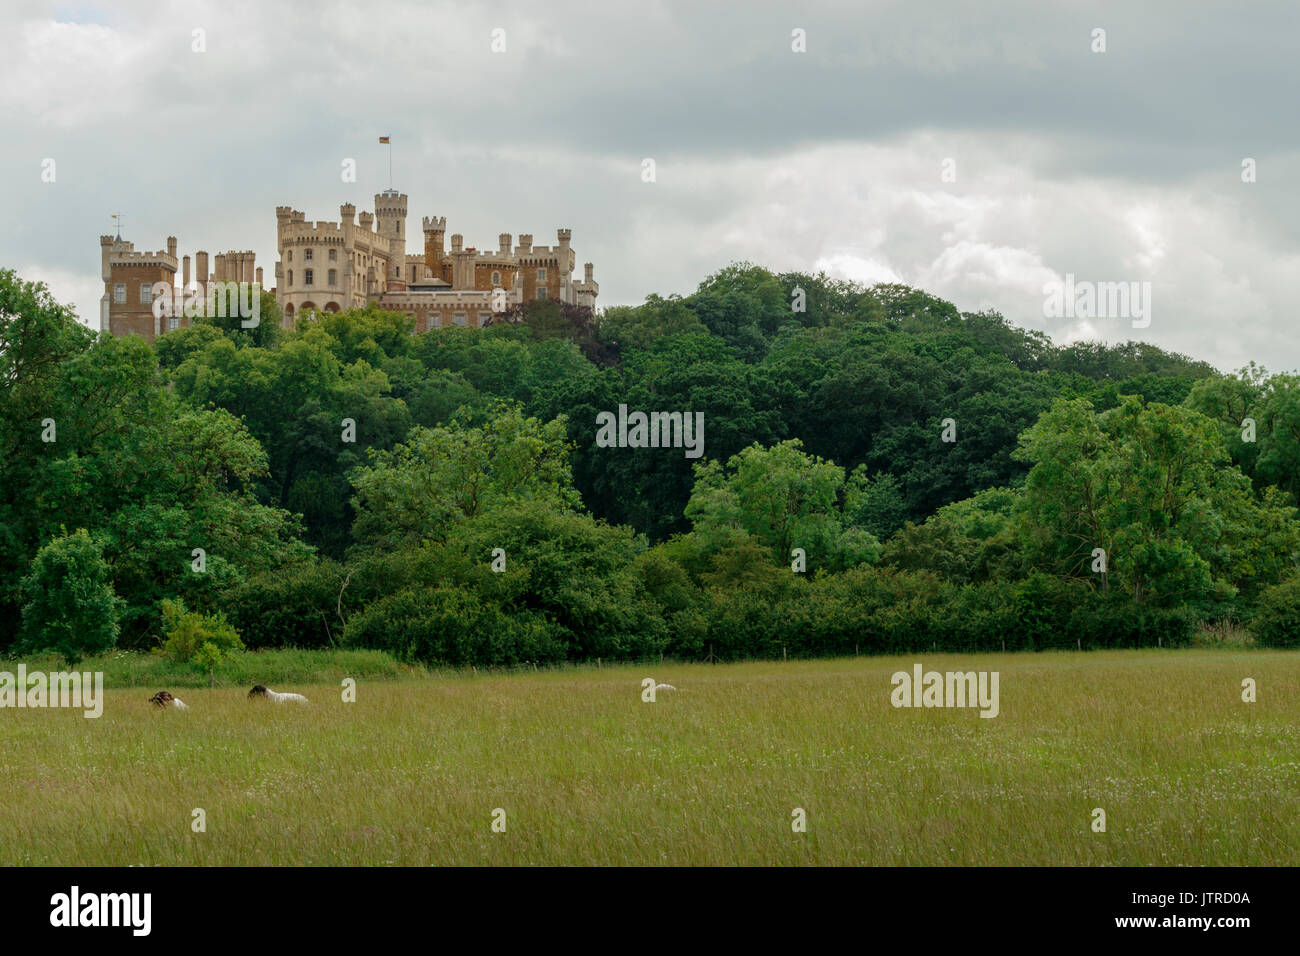 Belvoir castle the home of the Duke and Duchess of Rutland as view across the fields from Woolsthorpe. The castle overlooks The Vale of Belvoir Stock Photo